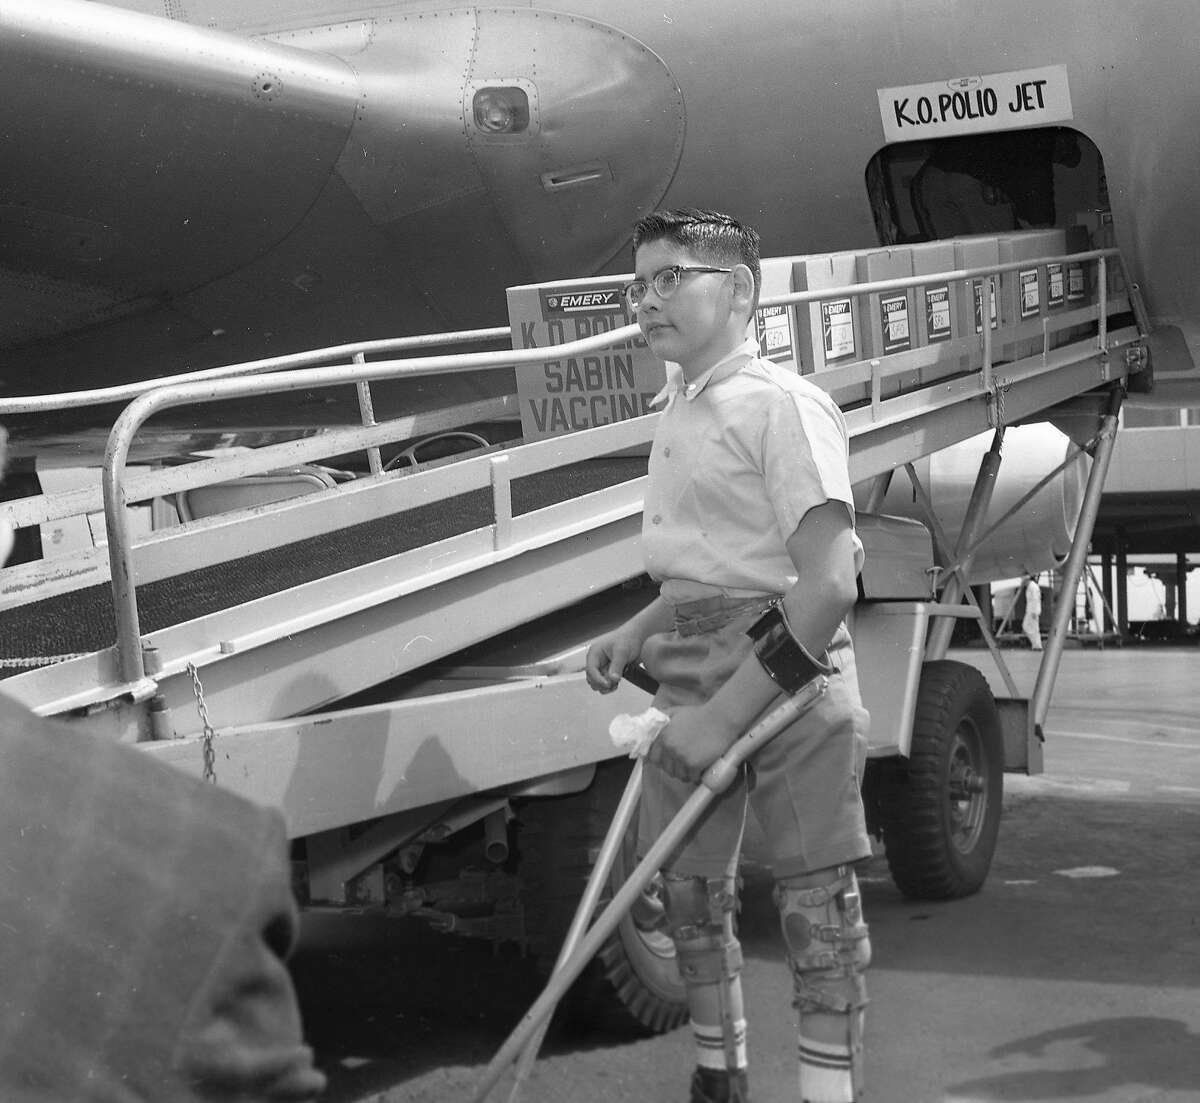 Polio victim Larry Montoya, is at the airport for the arrival of cases of the Sabin vaccine, which be distributed as par of the KO Polio campaign, September 5, 1962